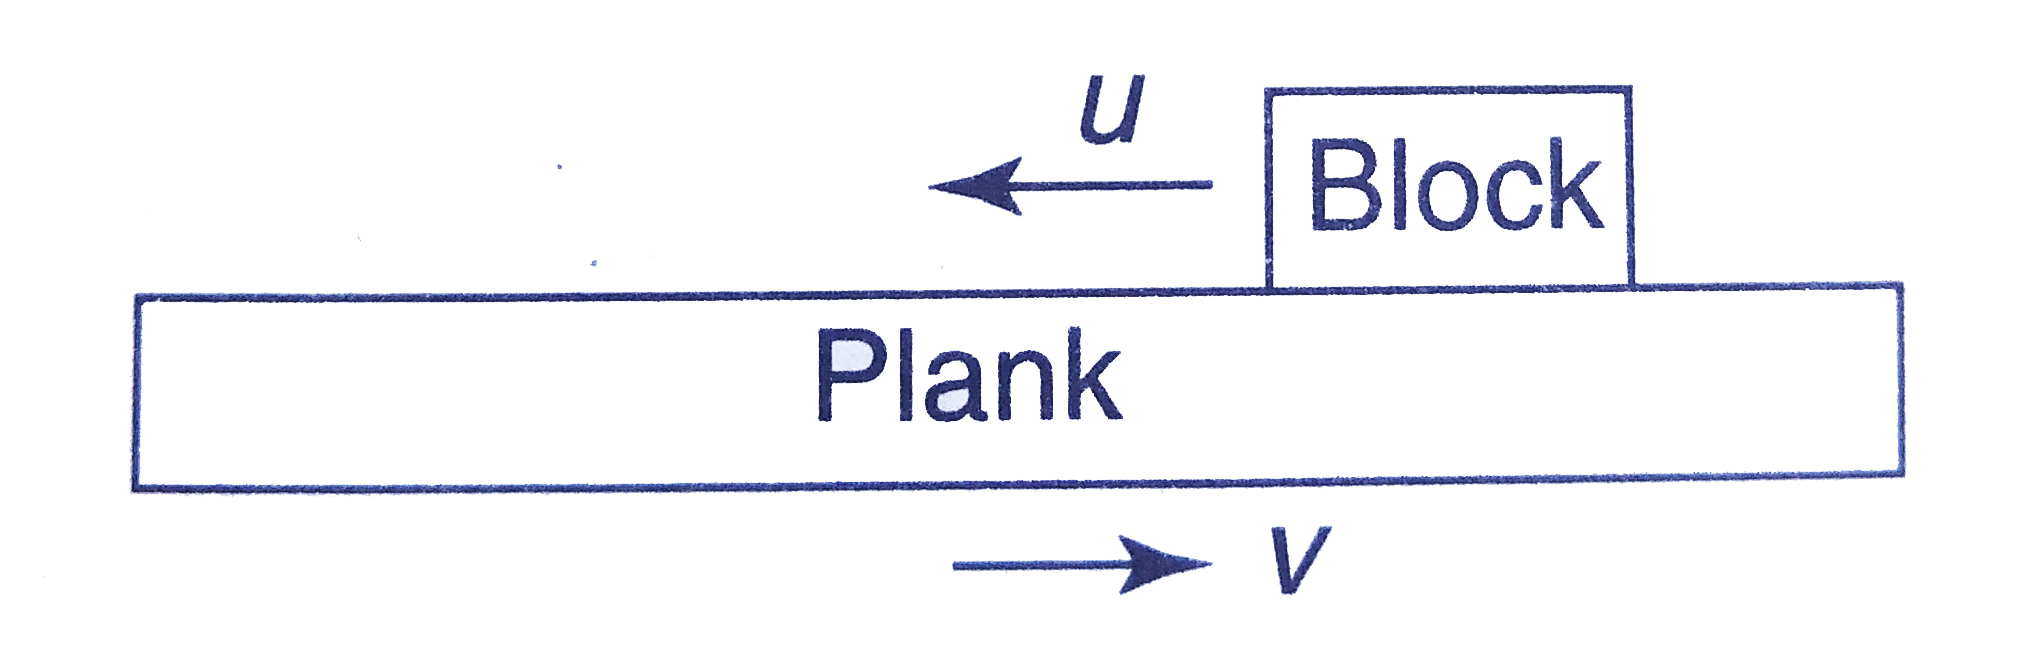 A plank is moving on ground with a velocity v and a block is moving on the plank with respect to it with a velocity u as shown in figure. What is the velocity of block with respect to ground ?